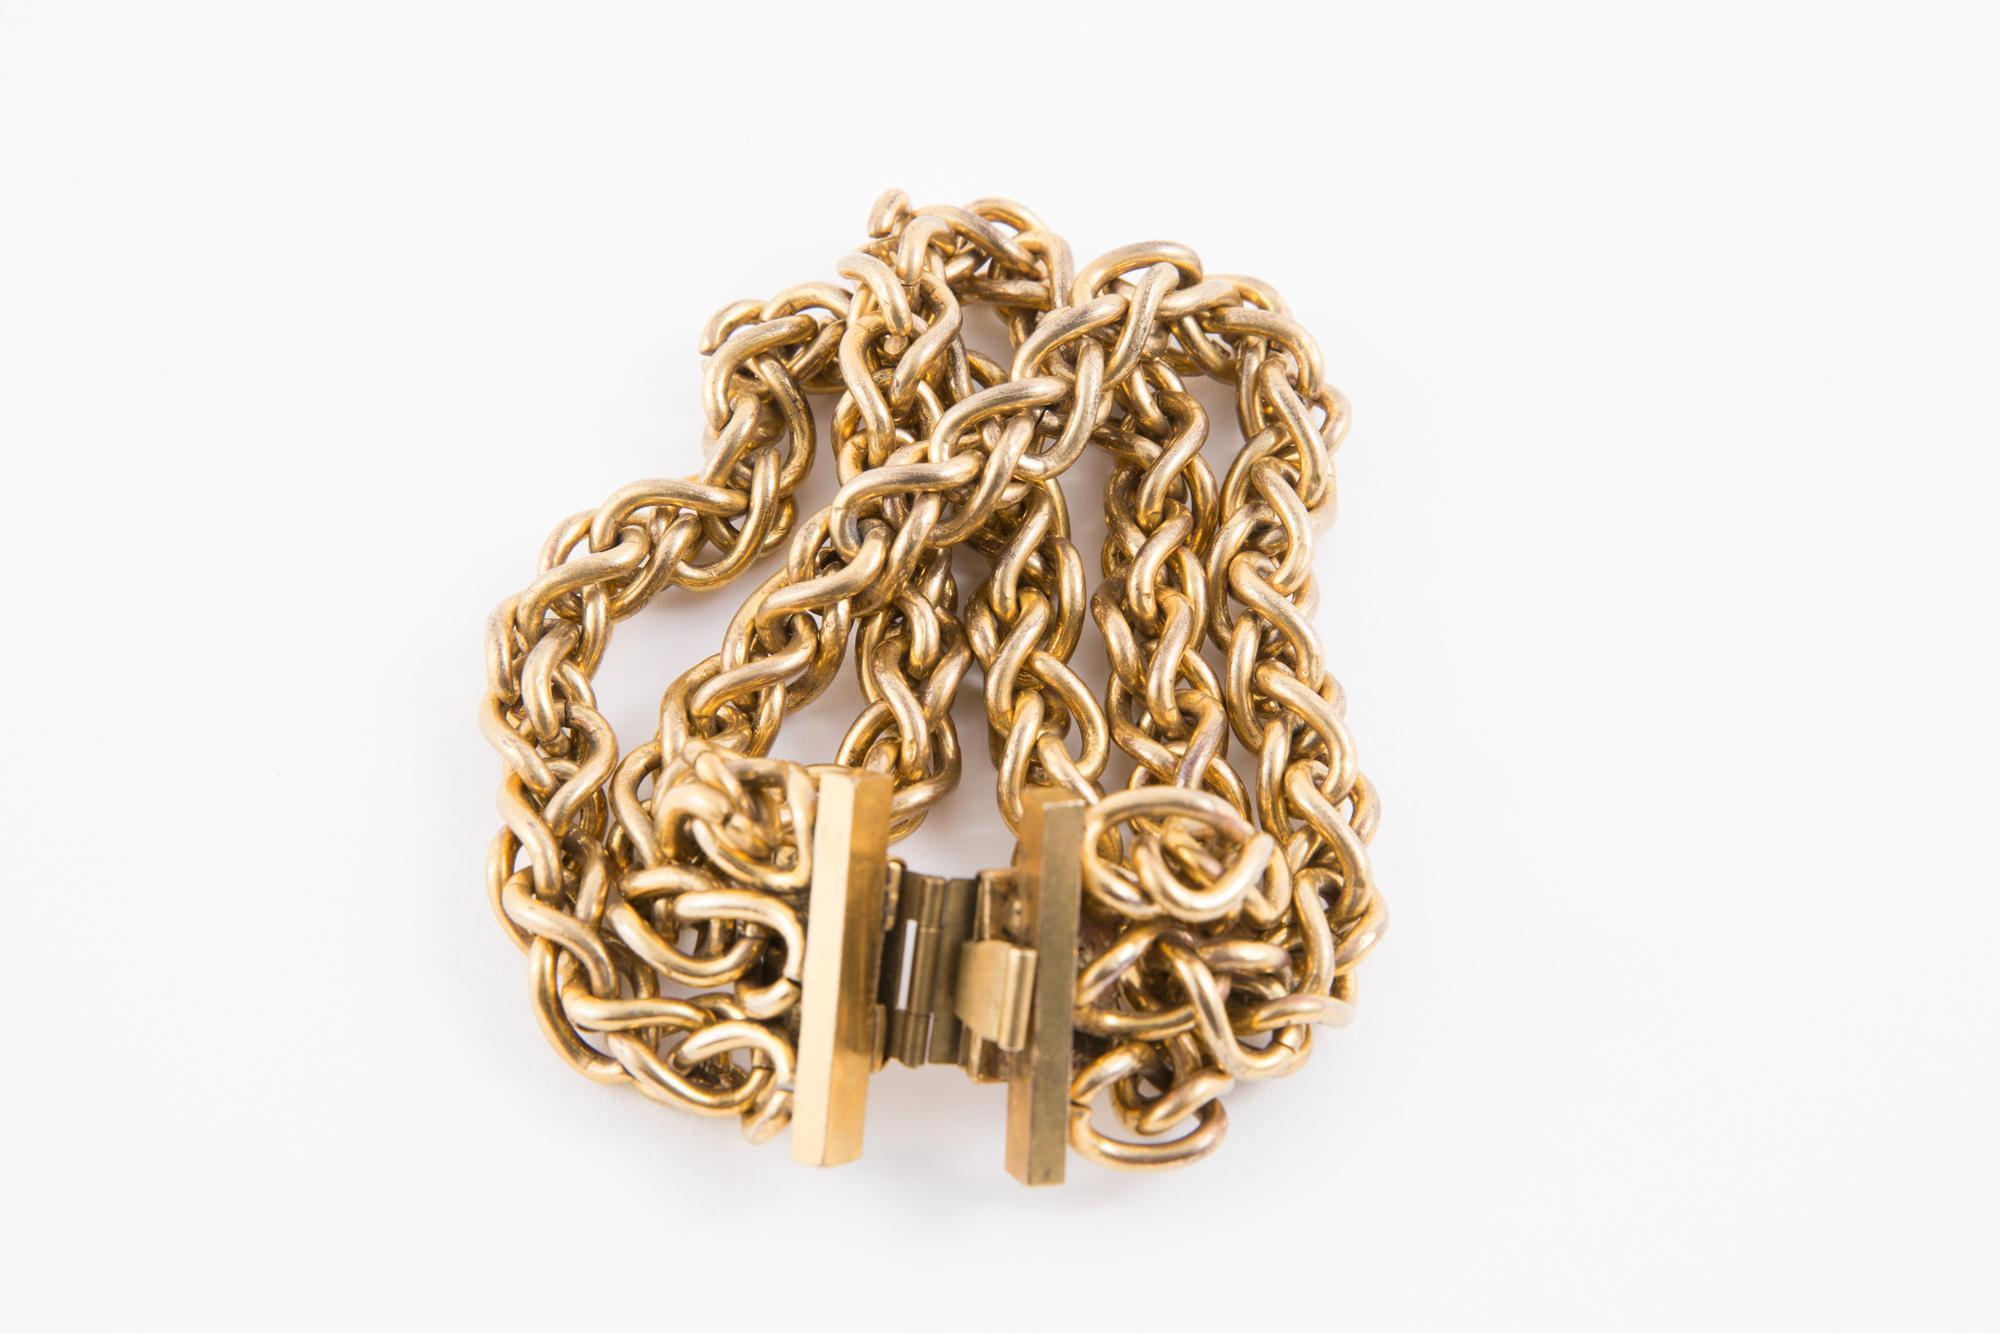 Edouard Rambaud gold tone chain bracelet featuring three rows of curb chains, a logo plaque under the bracelet claps. 
Edouard Rambaud is known for the large statement pieces he designed in the 1980s, specifically for runway shows.
In good vintage